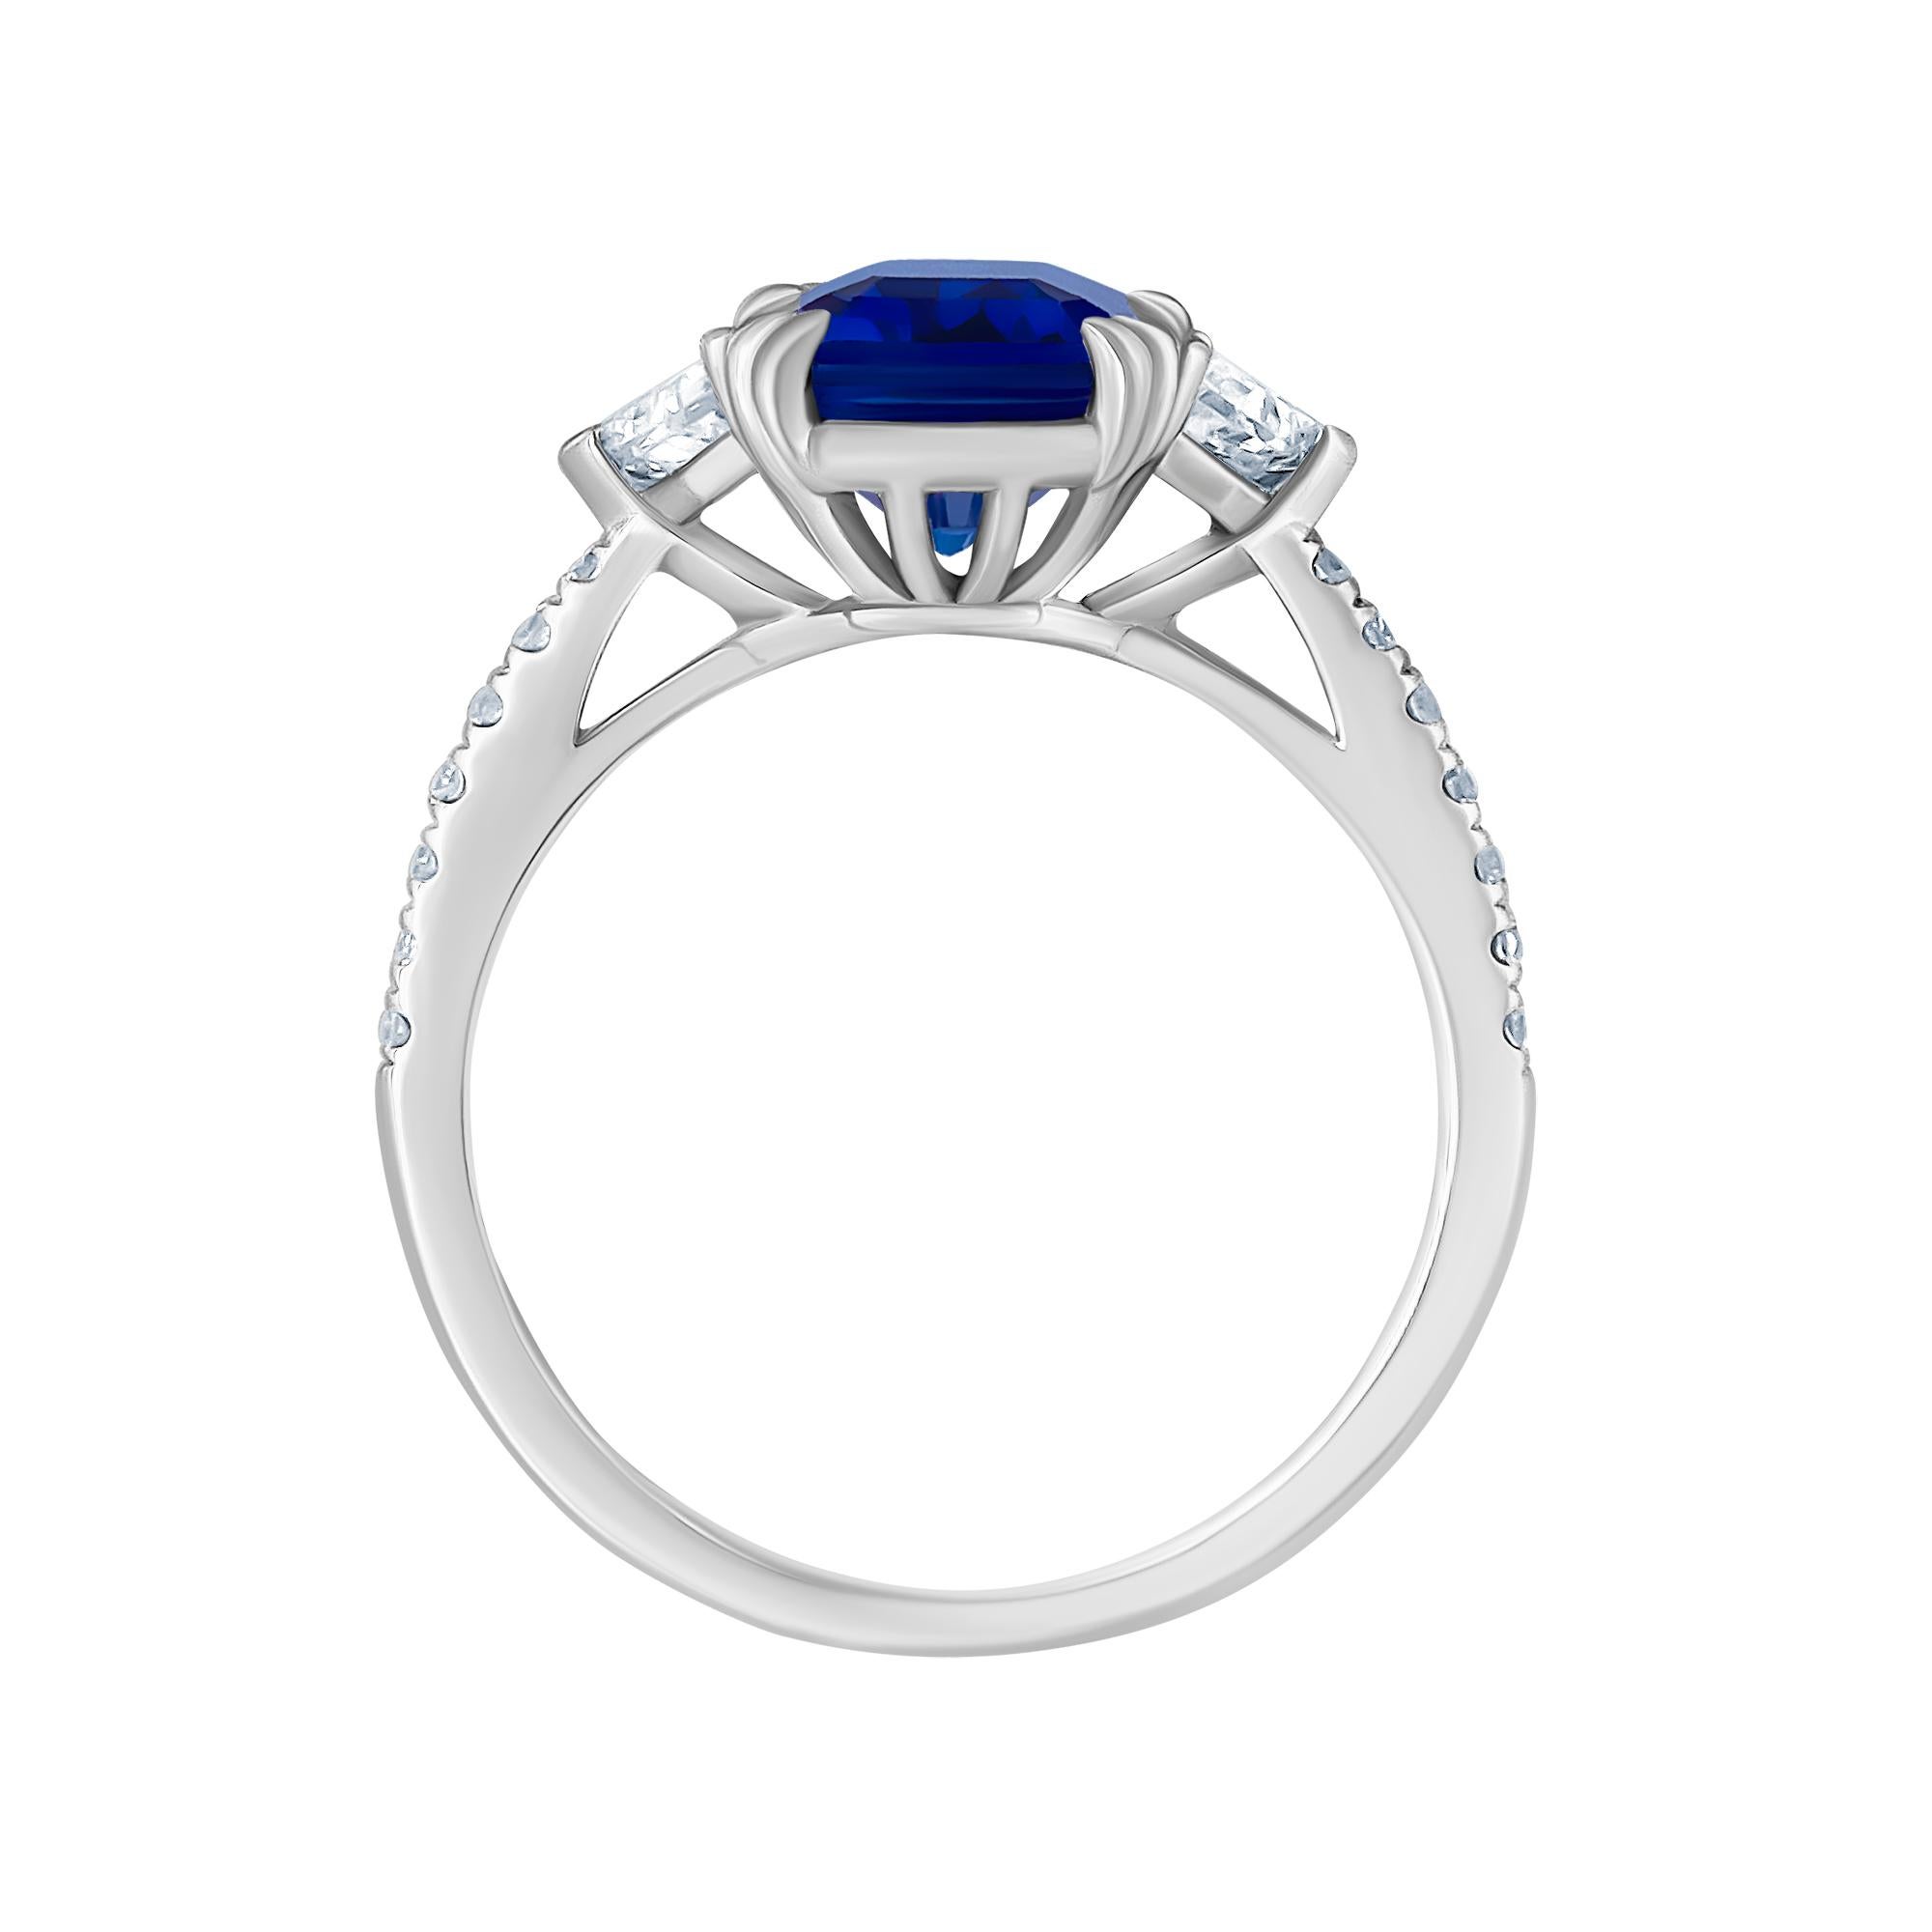 This beautiful Diamond Sapphire ring was crafted in luxurious Platinum. This ring is adorned with a cornflower blue Color; 4.34ct  Emerald Cut ceylon Sapphire. Measuring 10.70x7.50 mm. The side diamonds are Epau,ette cut F color vvs2 clarity and